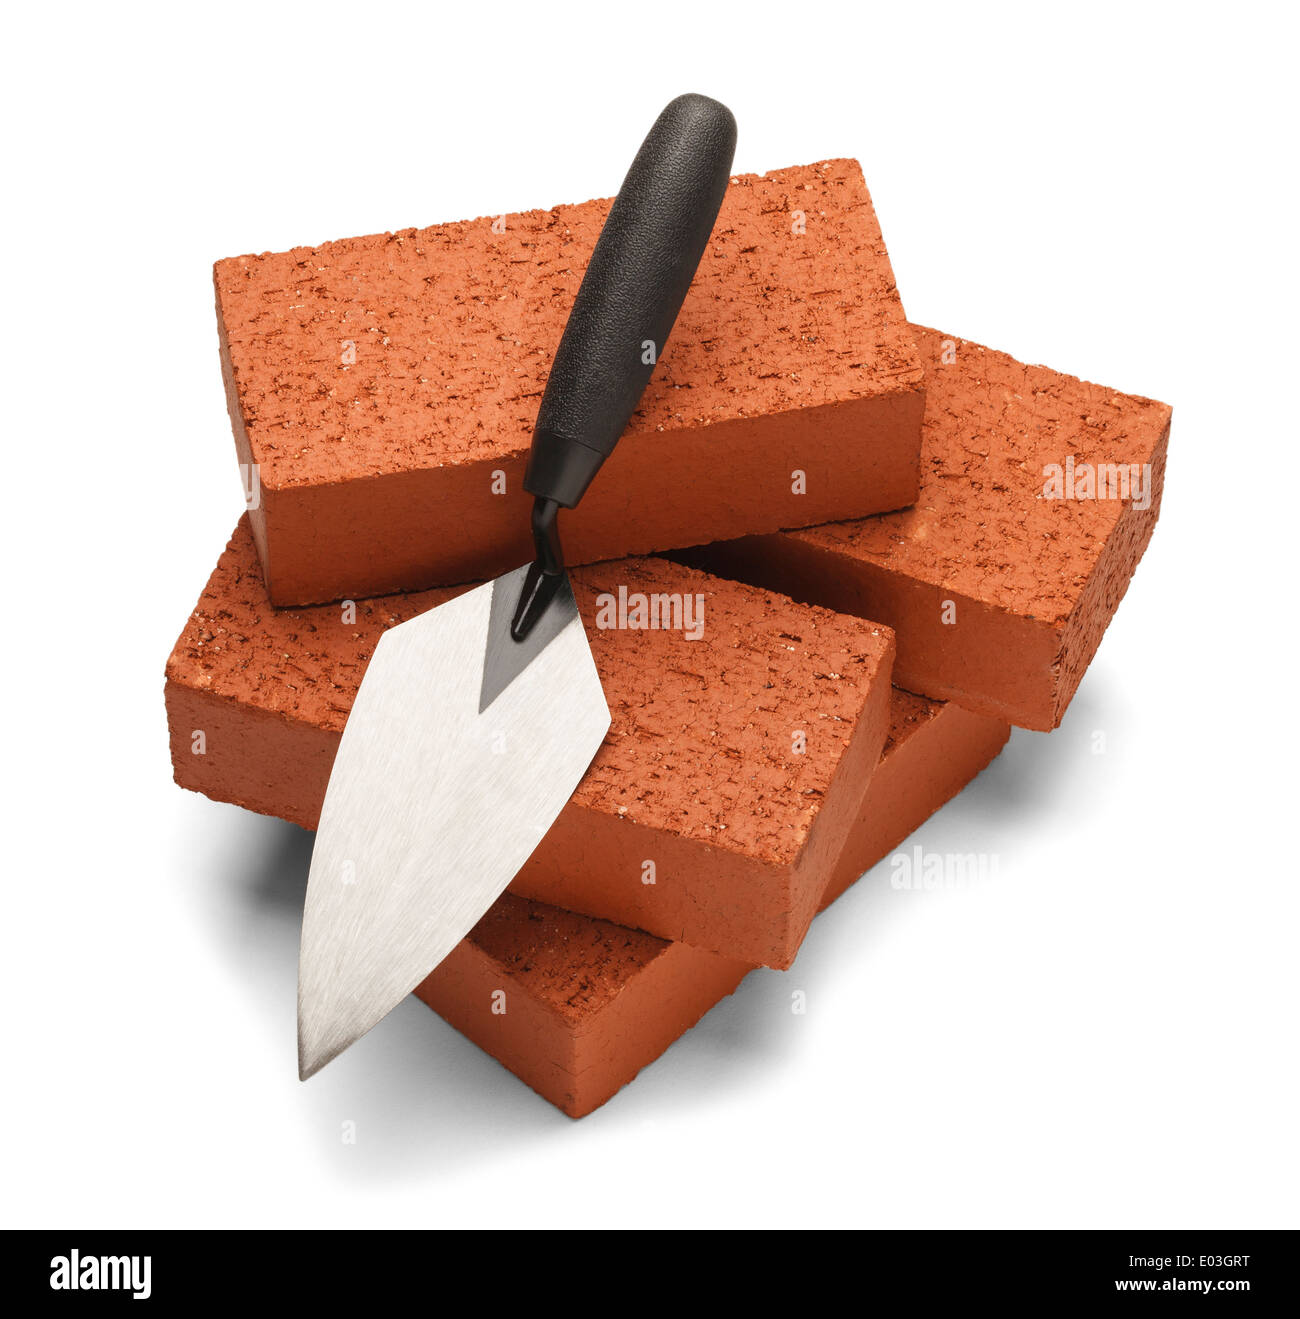 Pile of bricks with trowel isolated on a white background. Stock Photo